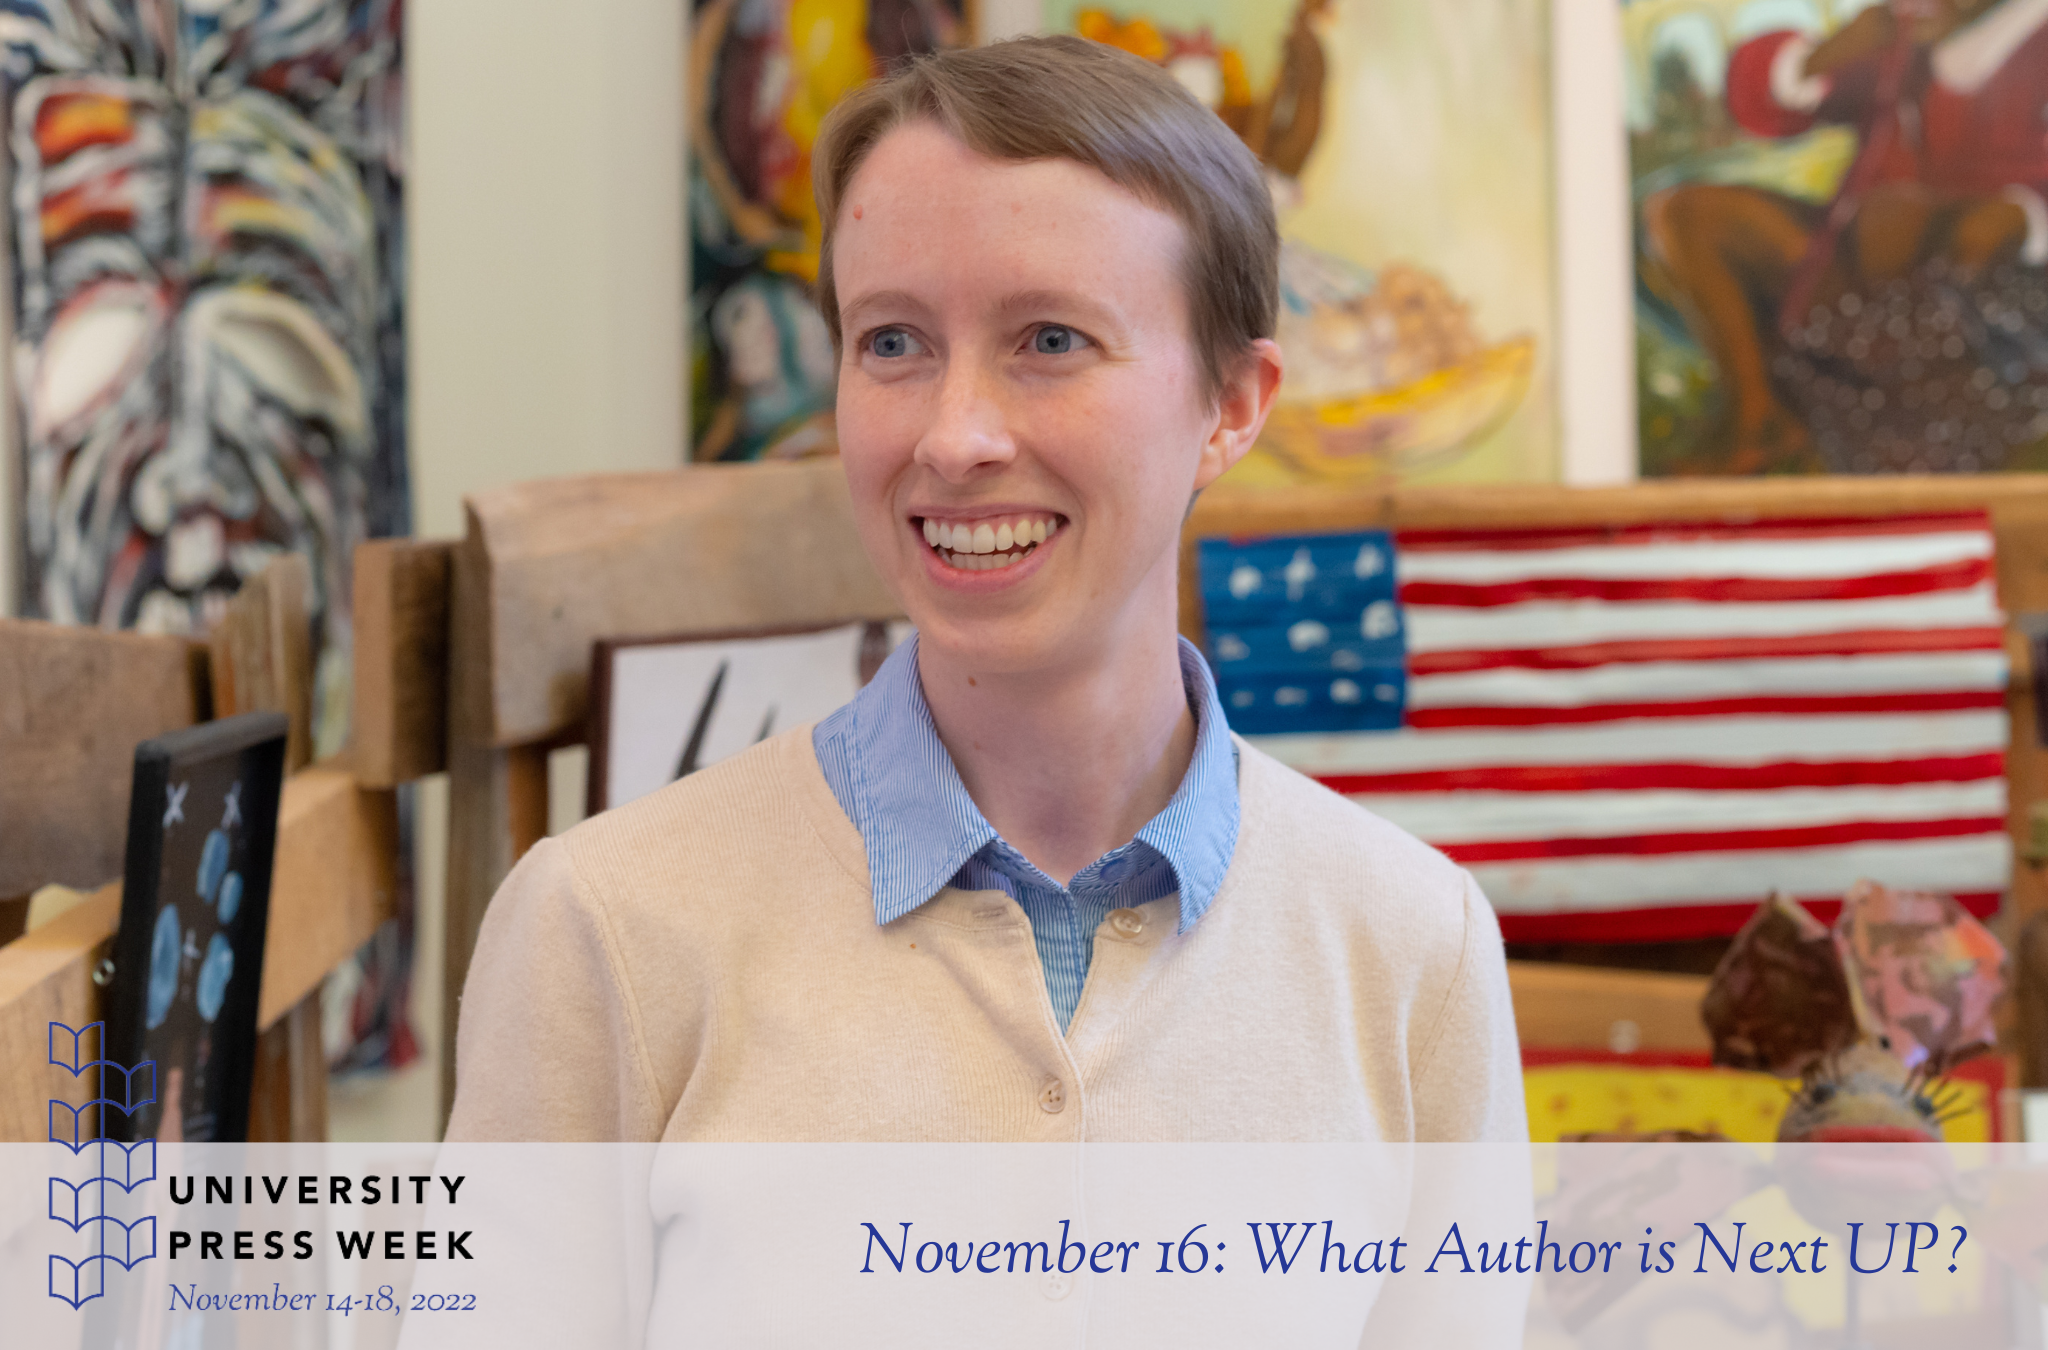 Dr. Christine Schott, a smiling woman with short hair wearing a pale yellow sweater and blue shirt, above the University Press Week logo and the words "November 16: What Author is Next UP?" 